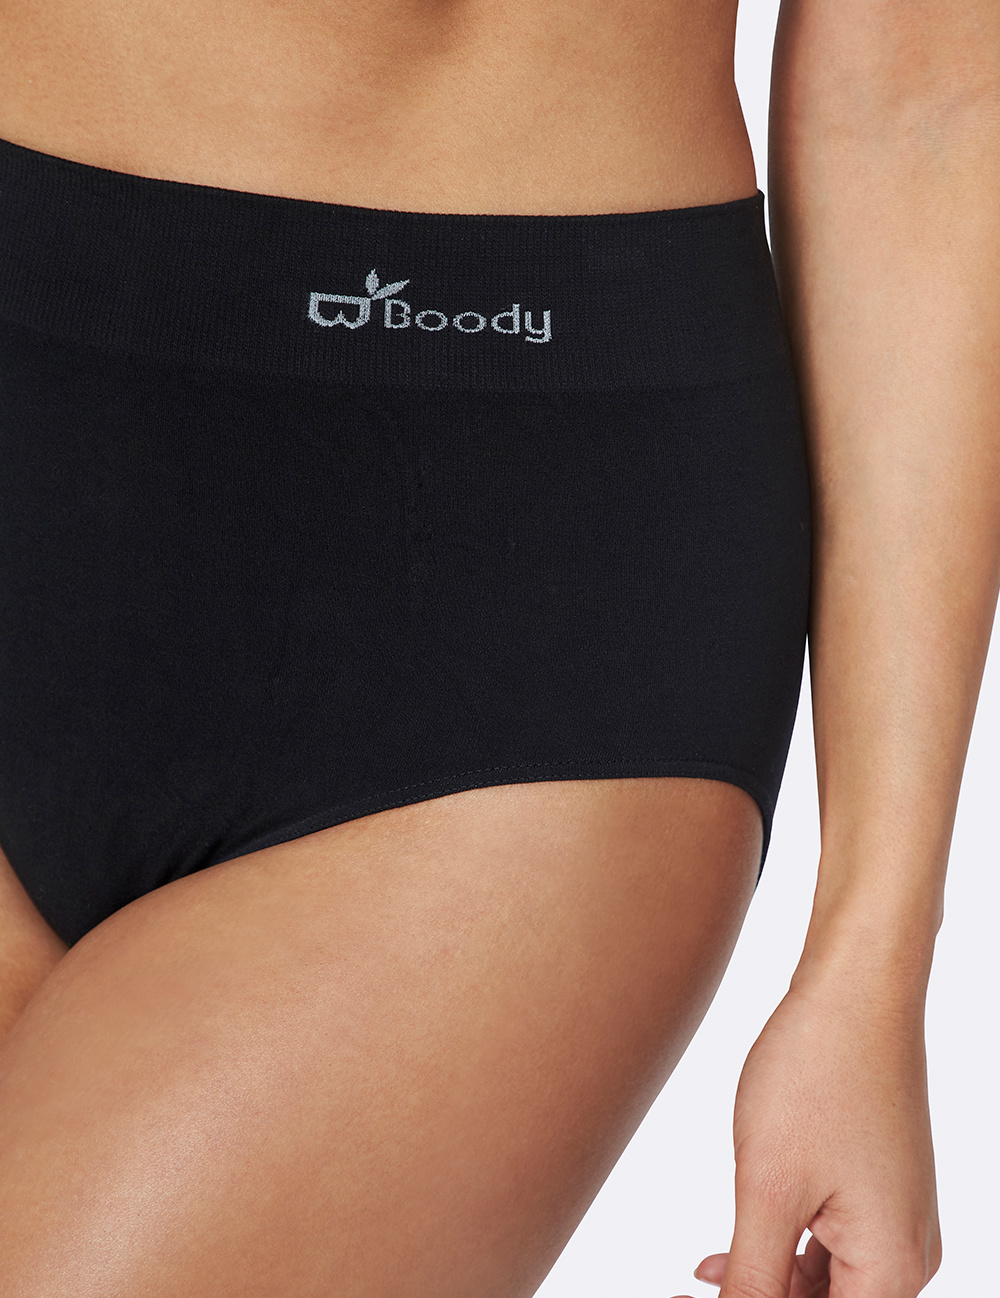 Bamboo Full Briefs by Boody